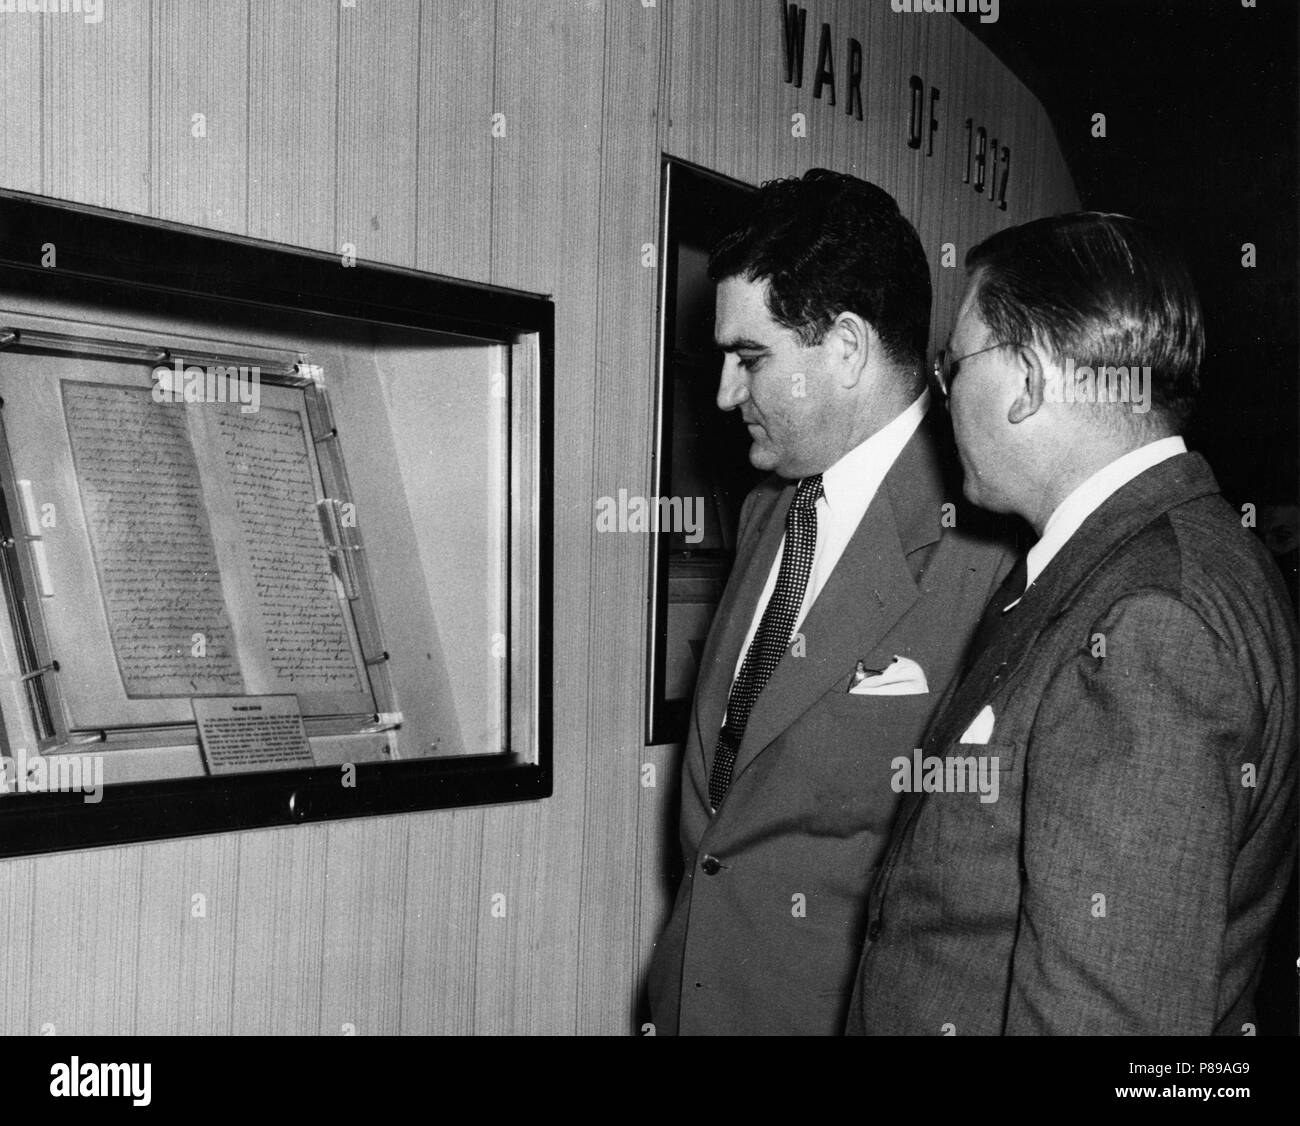 General Services Administration (GSA) Administrator Jess Larson and U.S. Archivist, Wayne C. Grover, at the Official Opening of the Freedom Train Exhibit in the National Archives Building Stock Photo